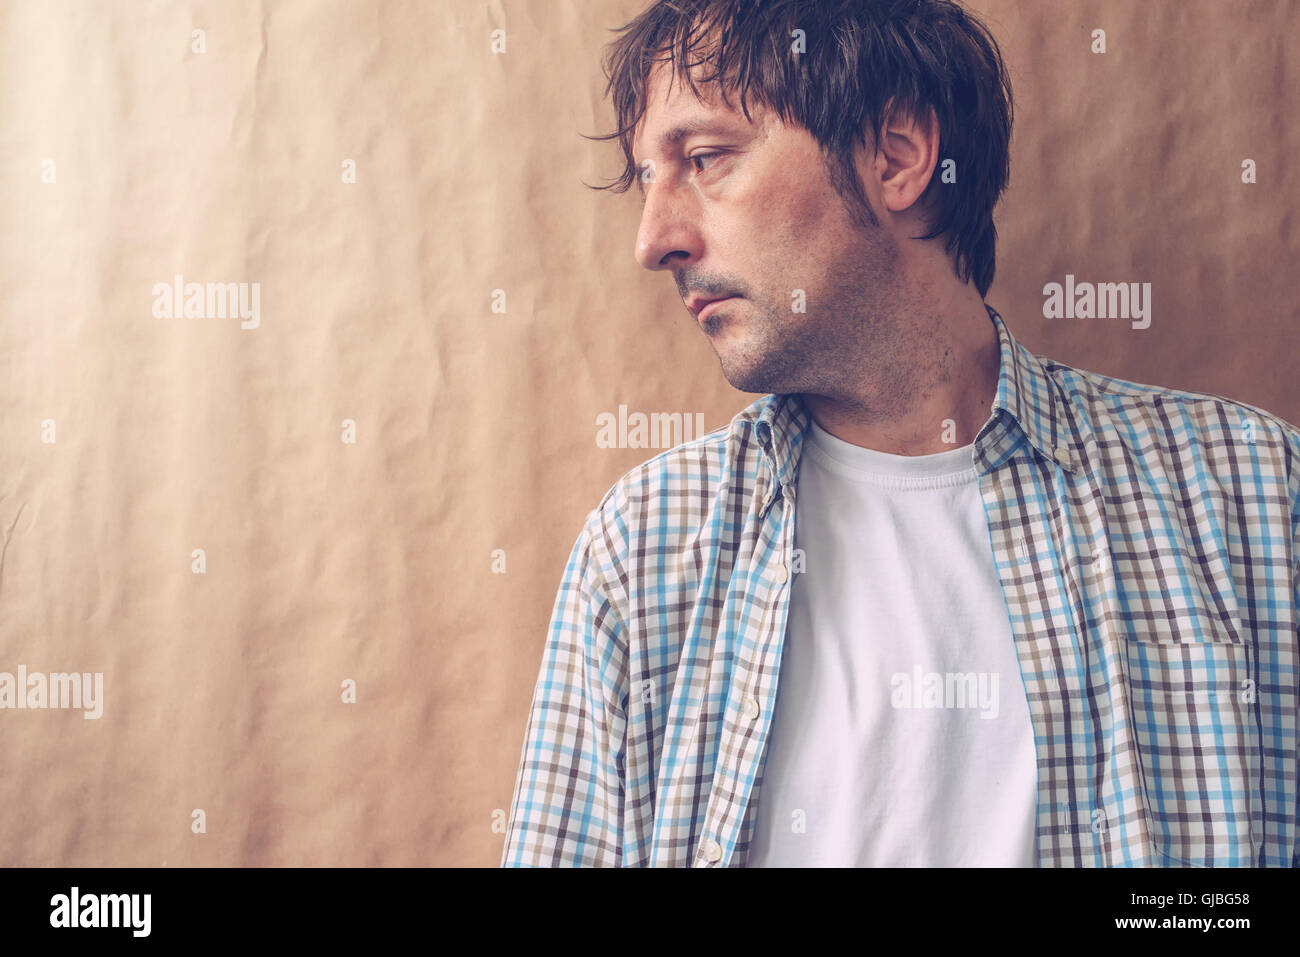 Depressive sad man profile portrait, male person with unhappy gloomy facial expression leaning on to wall and looking to a side. Stock Photo